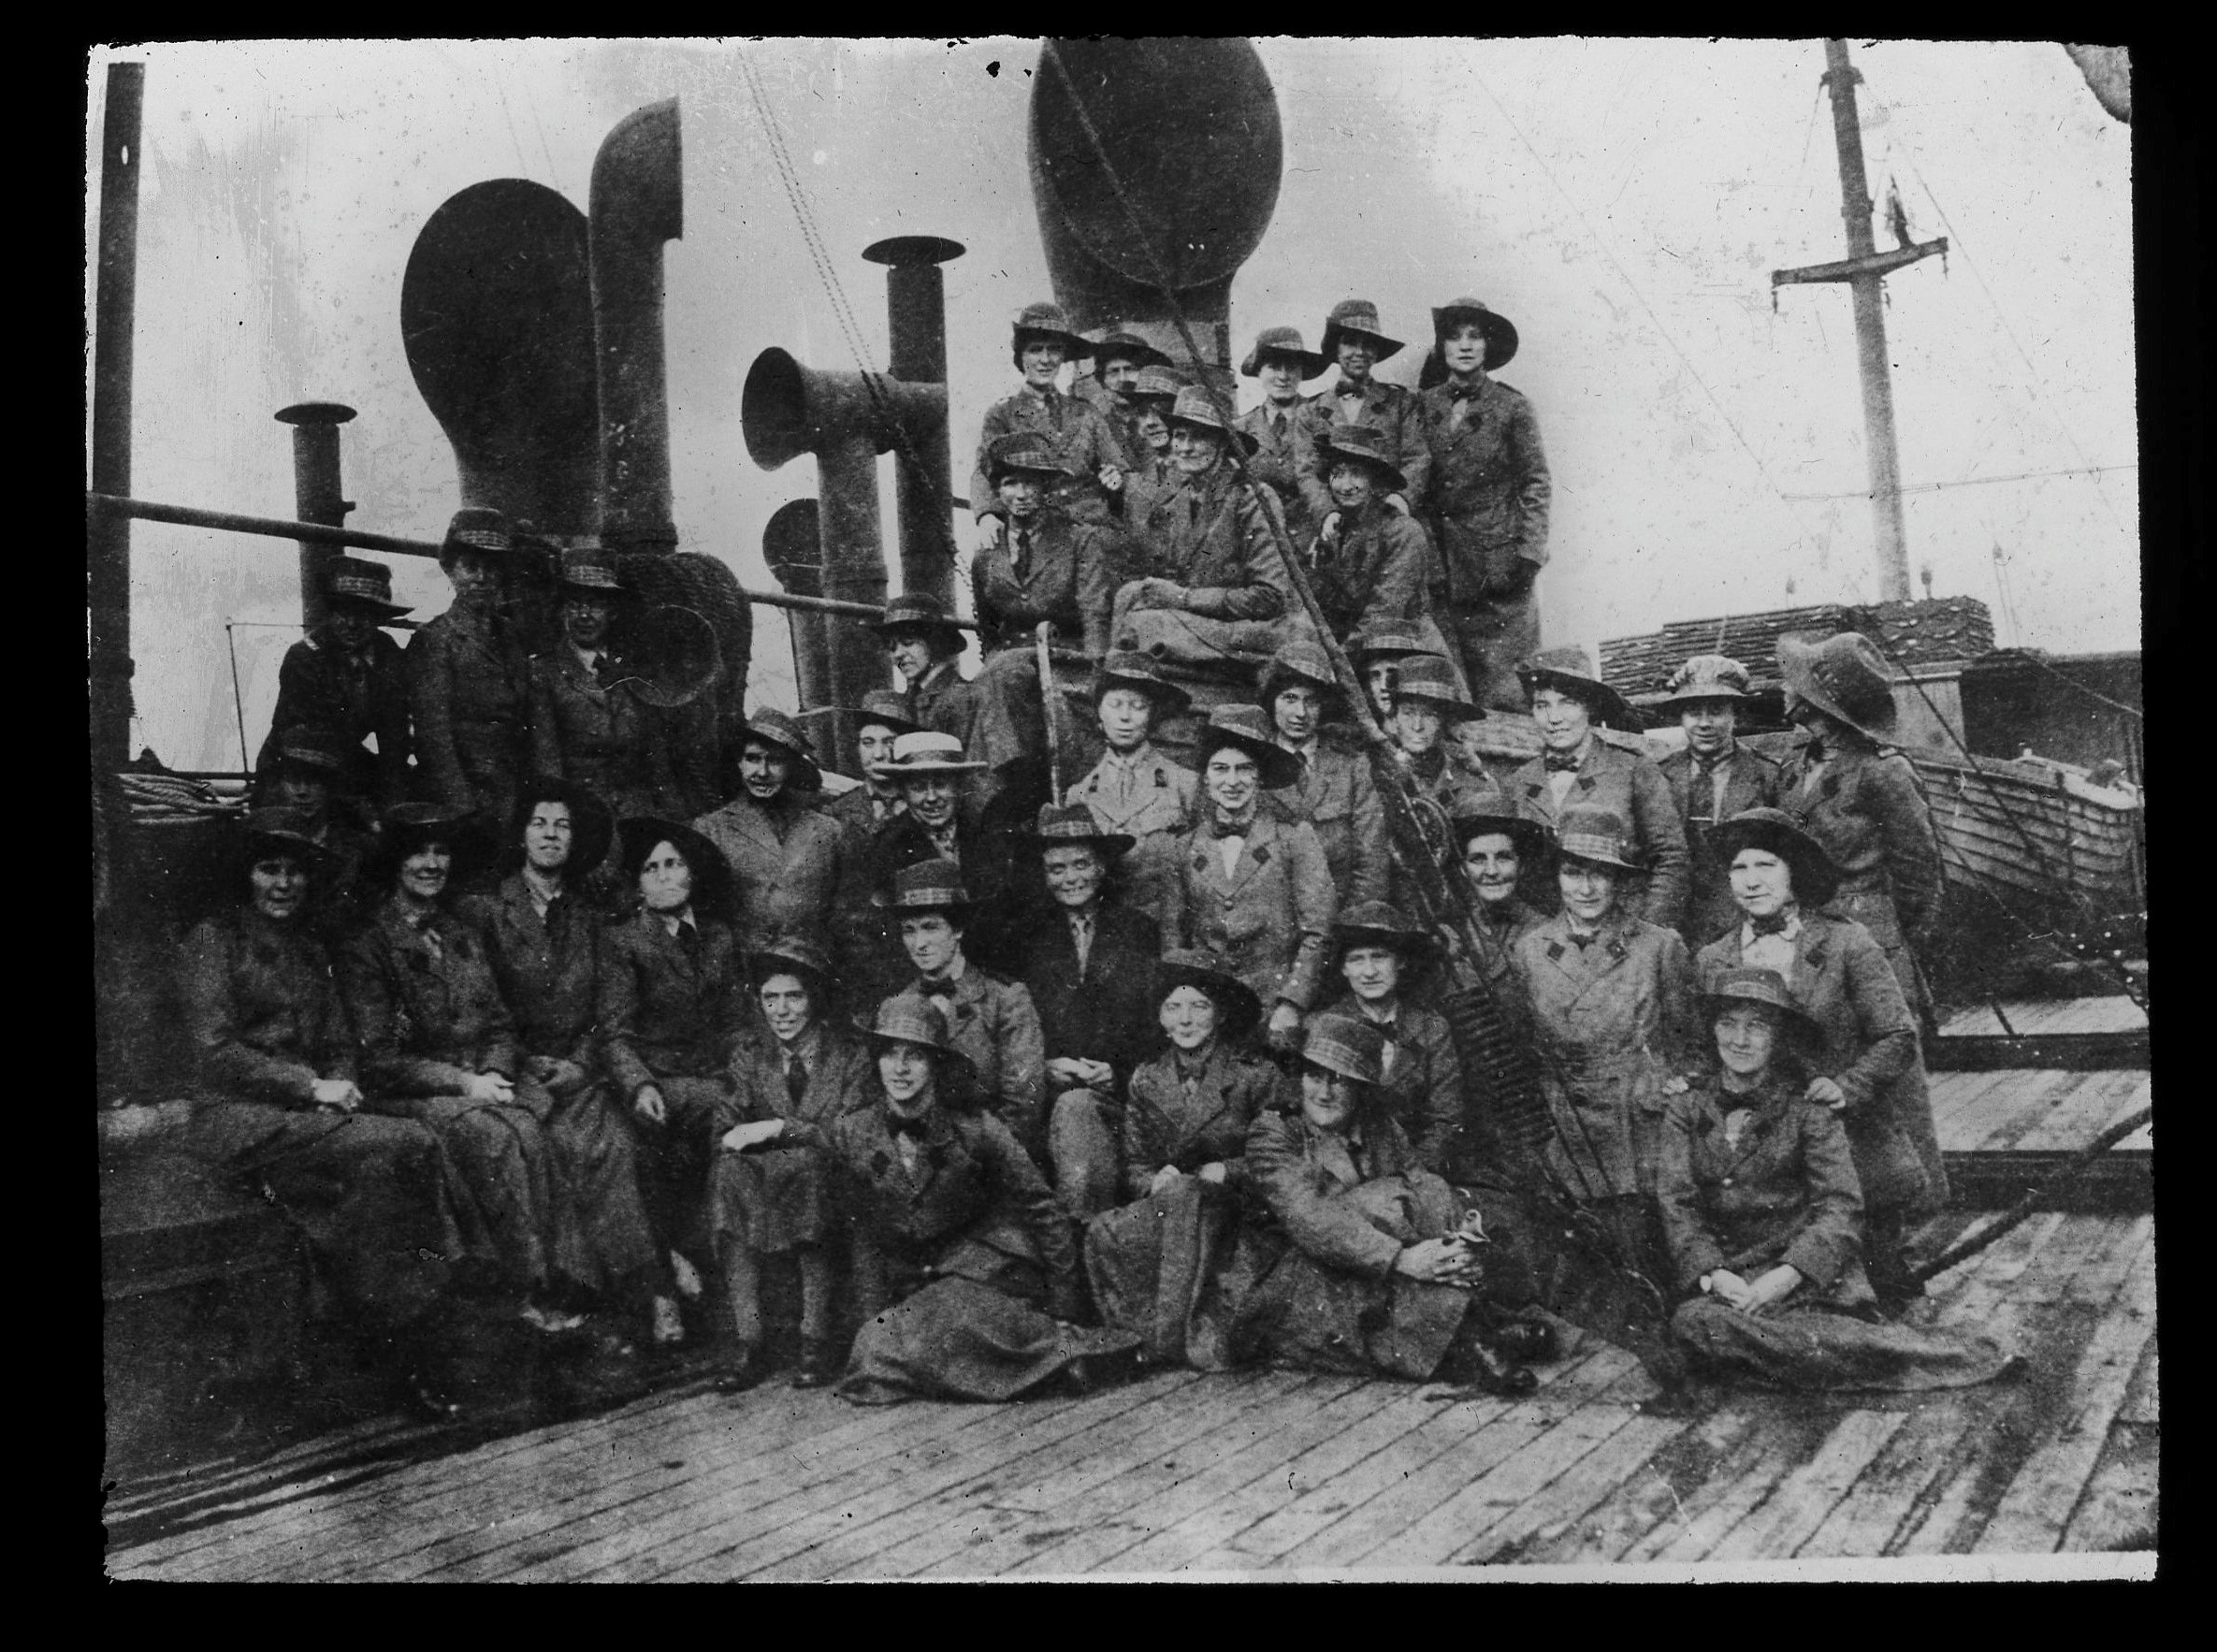 Glass plate slide of some of the Scottish WomenÃs Hospital staff on board the ship Huntspill, bound for Archangel in Russia, September 1916.  Dr Inglis is seated in the centre wearing a trilby hat.. See Centrepress story CPMEDALS; Staff at a Scots museum have uncovered the remarkable story of a cook who travelled across Europe during the First World War - after finding a collection of 90-year-old medals.  Curators were researching items for a National Museum of Scotland's WW1 touring exhibition when they found a collection of medals from the conflict, including a Scottish Women's Hospital Lapel Badge.  Also found at Hawick Museum, Borders, were a collection of glass plate photographic slides and a certificate from the Serbian Government. All of the items had belonged to Mary Lee Milne, who sailed to Southern Russia with the Scottish Women's Hospital (SWH) in August 1916, receiving two medals for her war efforts abroad. Credit SWNS